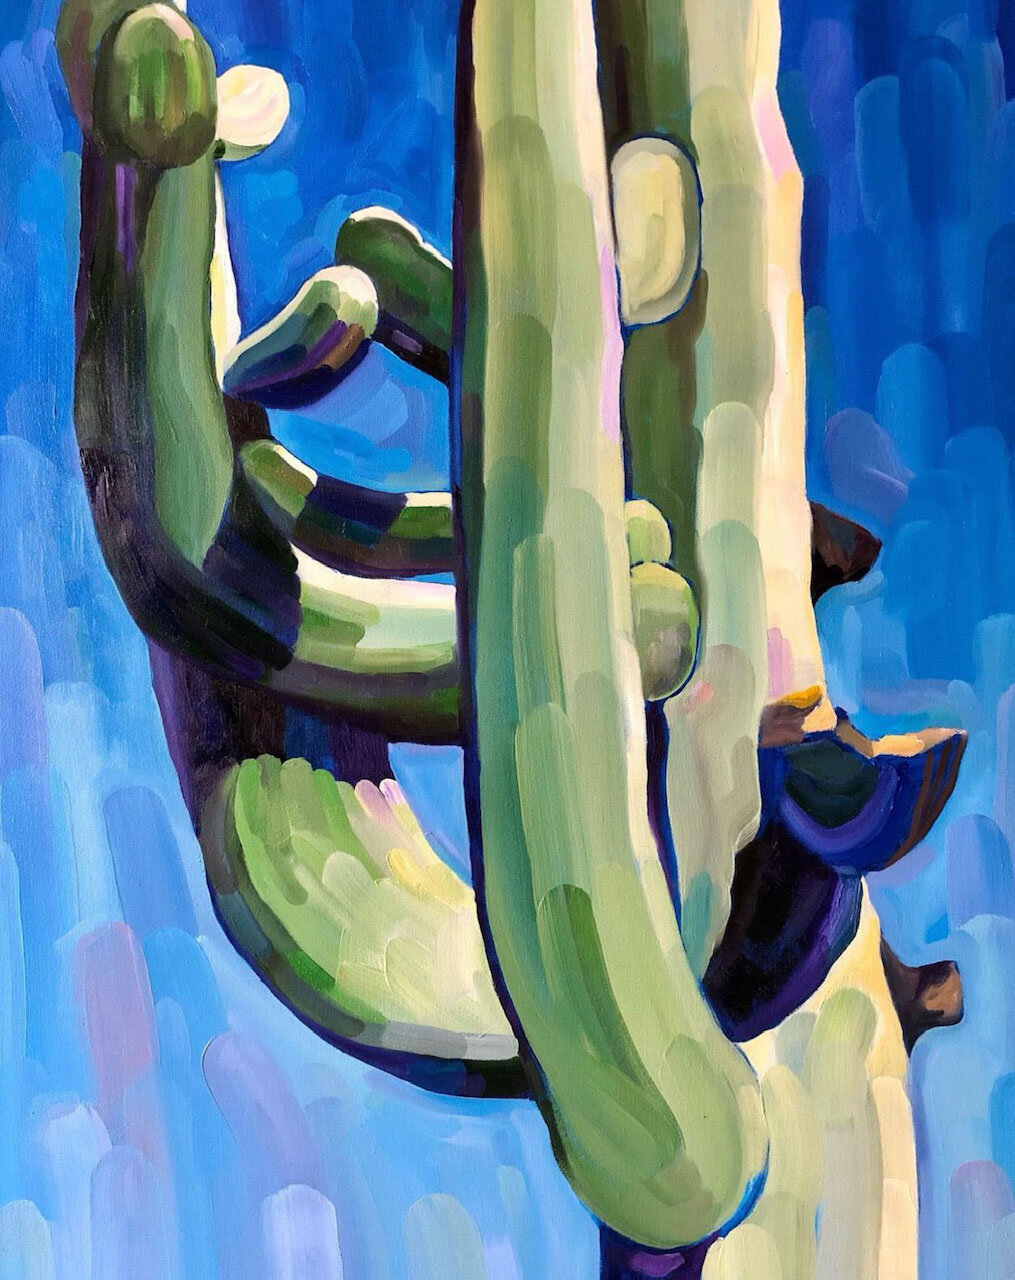 This Stacy Holmstedt work will be part of her upcoming “Saguaros & Shards” exhibit.